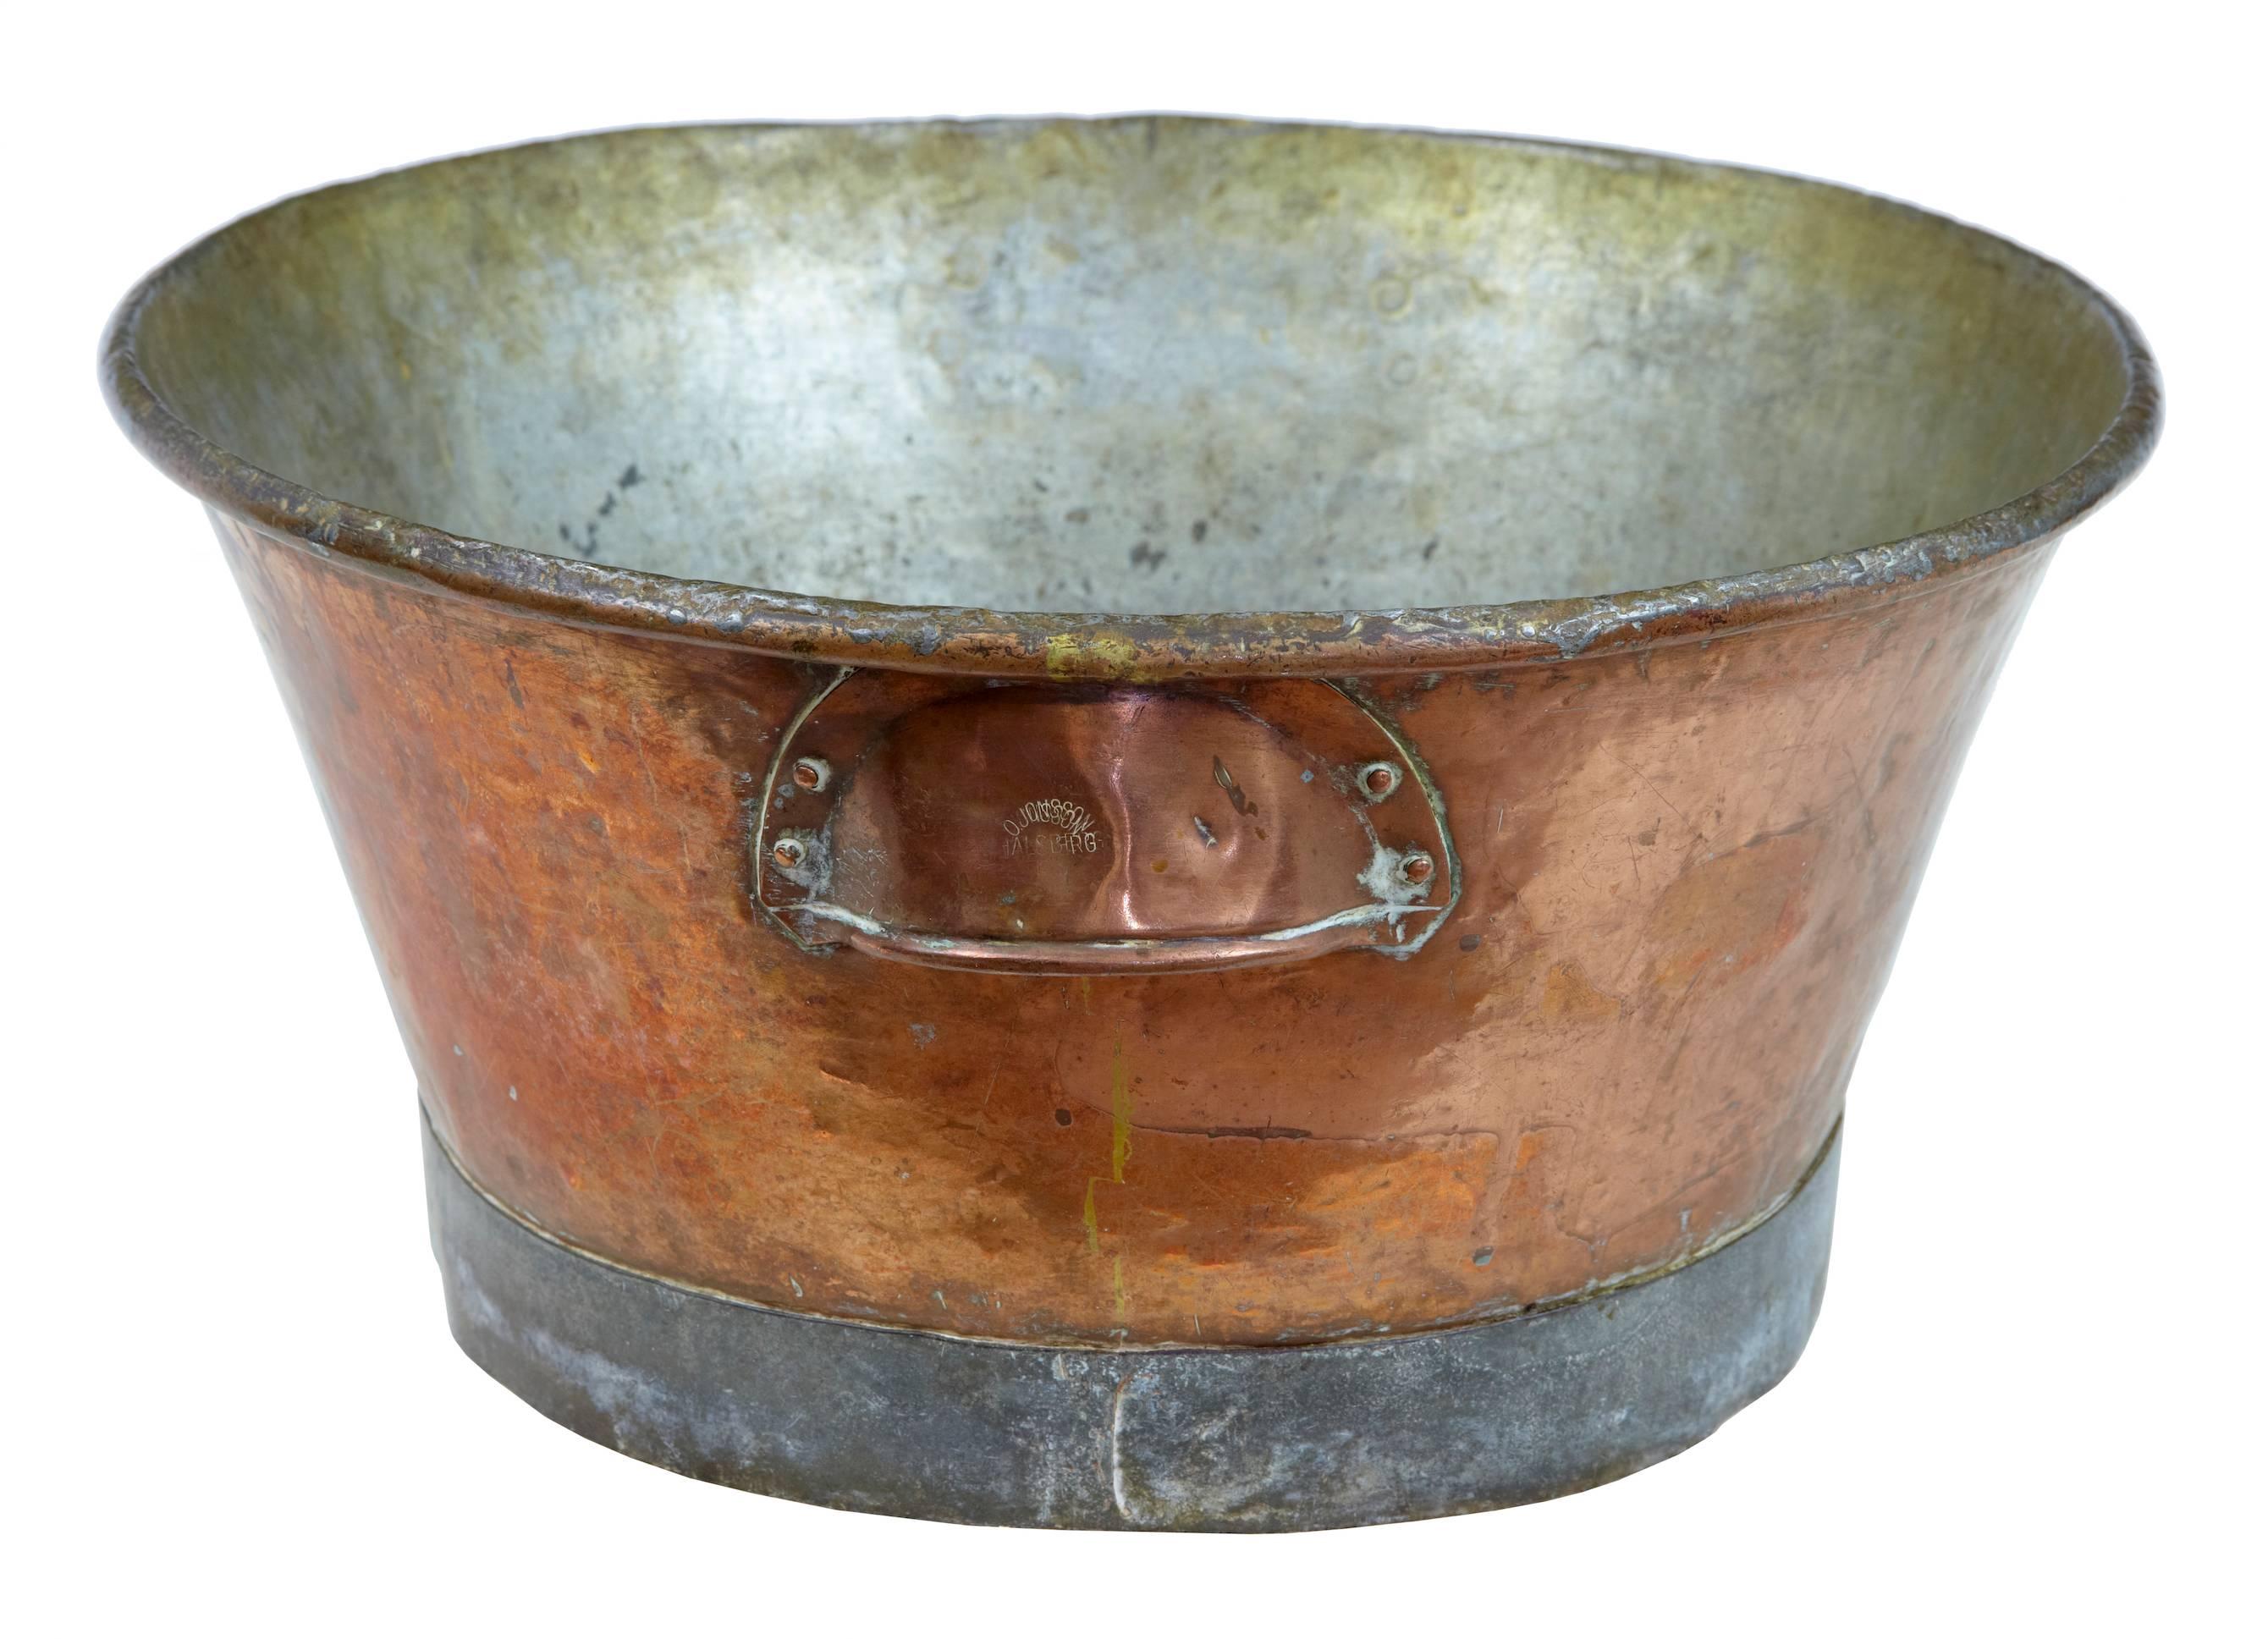 Arts & Crafts Scandinavian copper tub pot good quality copper cooking pot, circa 1890. Stamped O Jonsson Halsberg.

Measures: Height 7 1/2